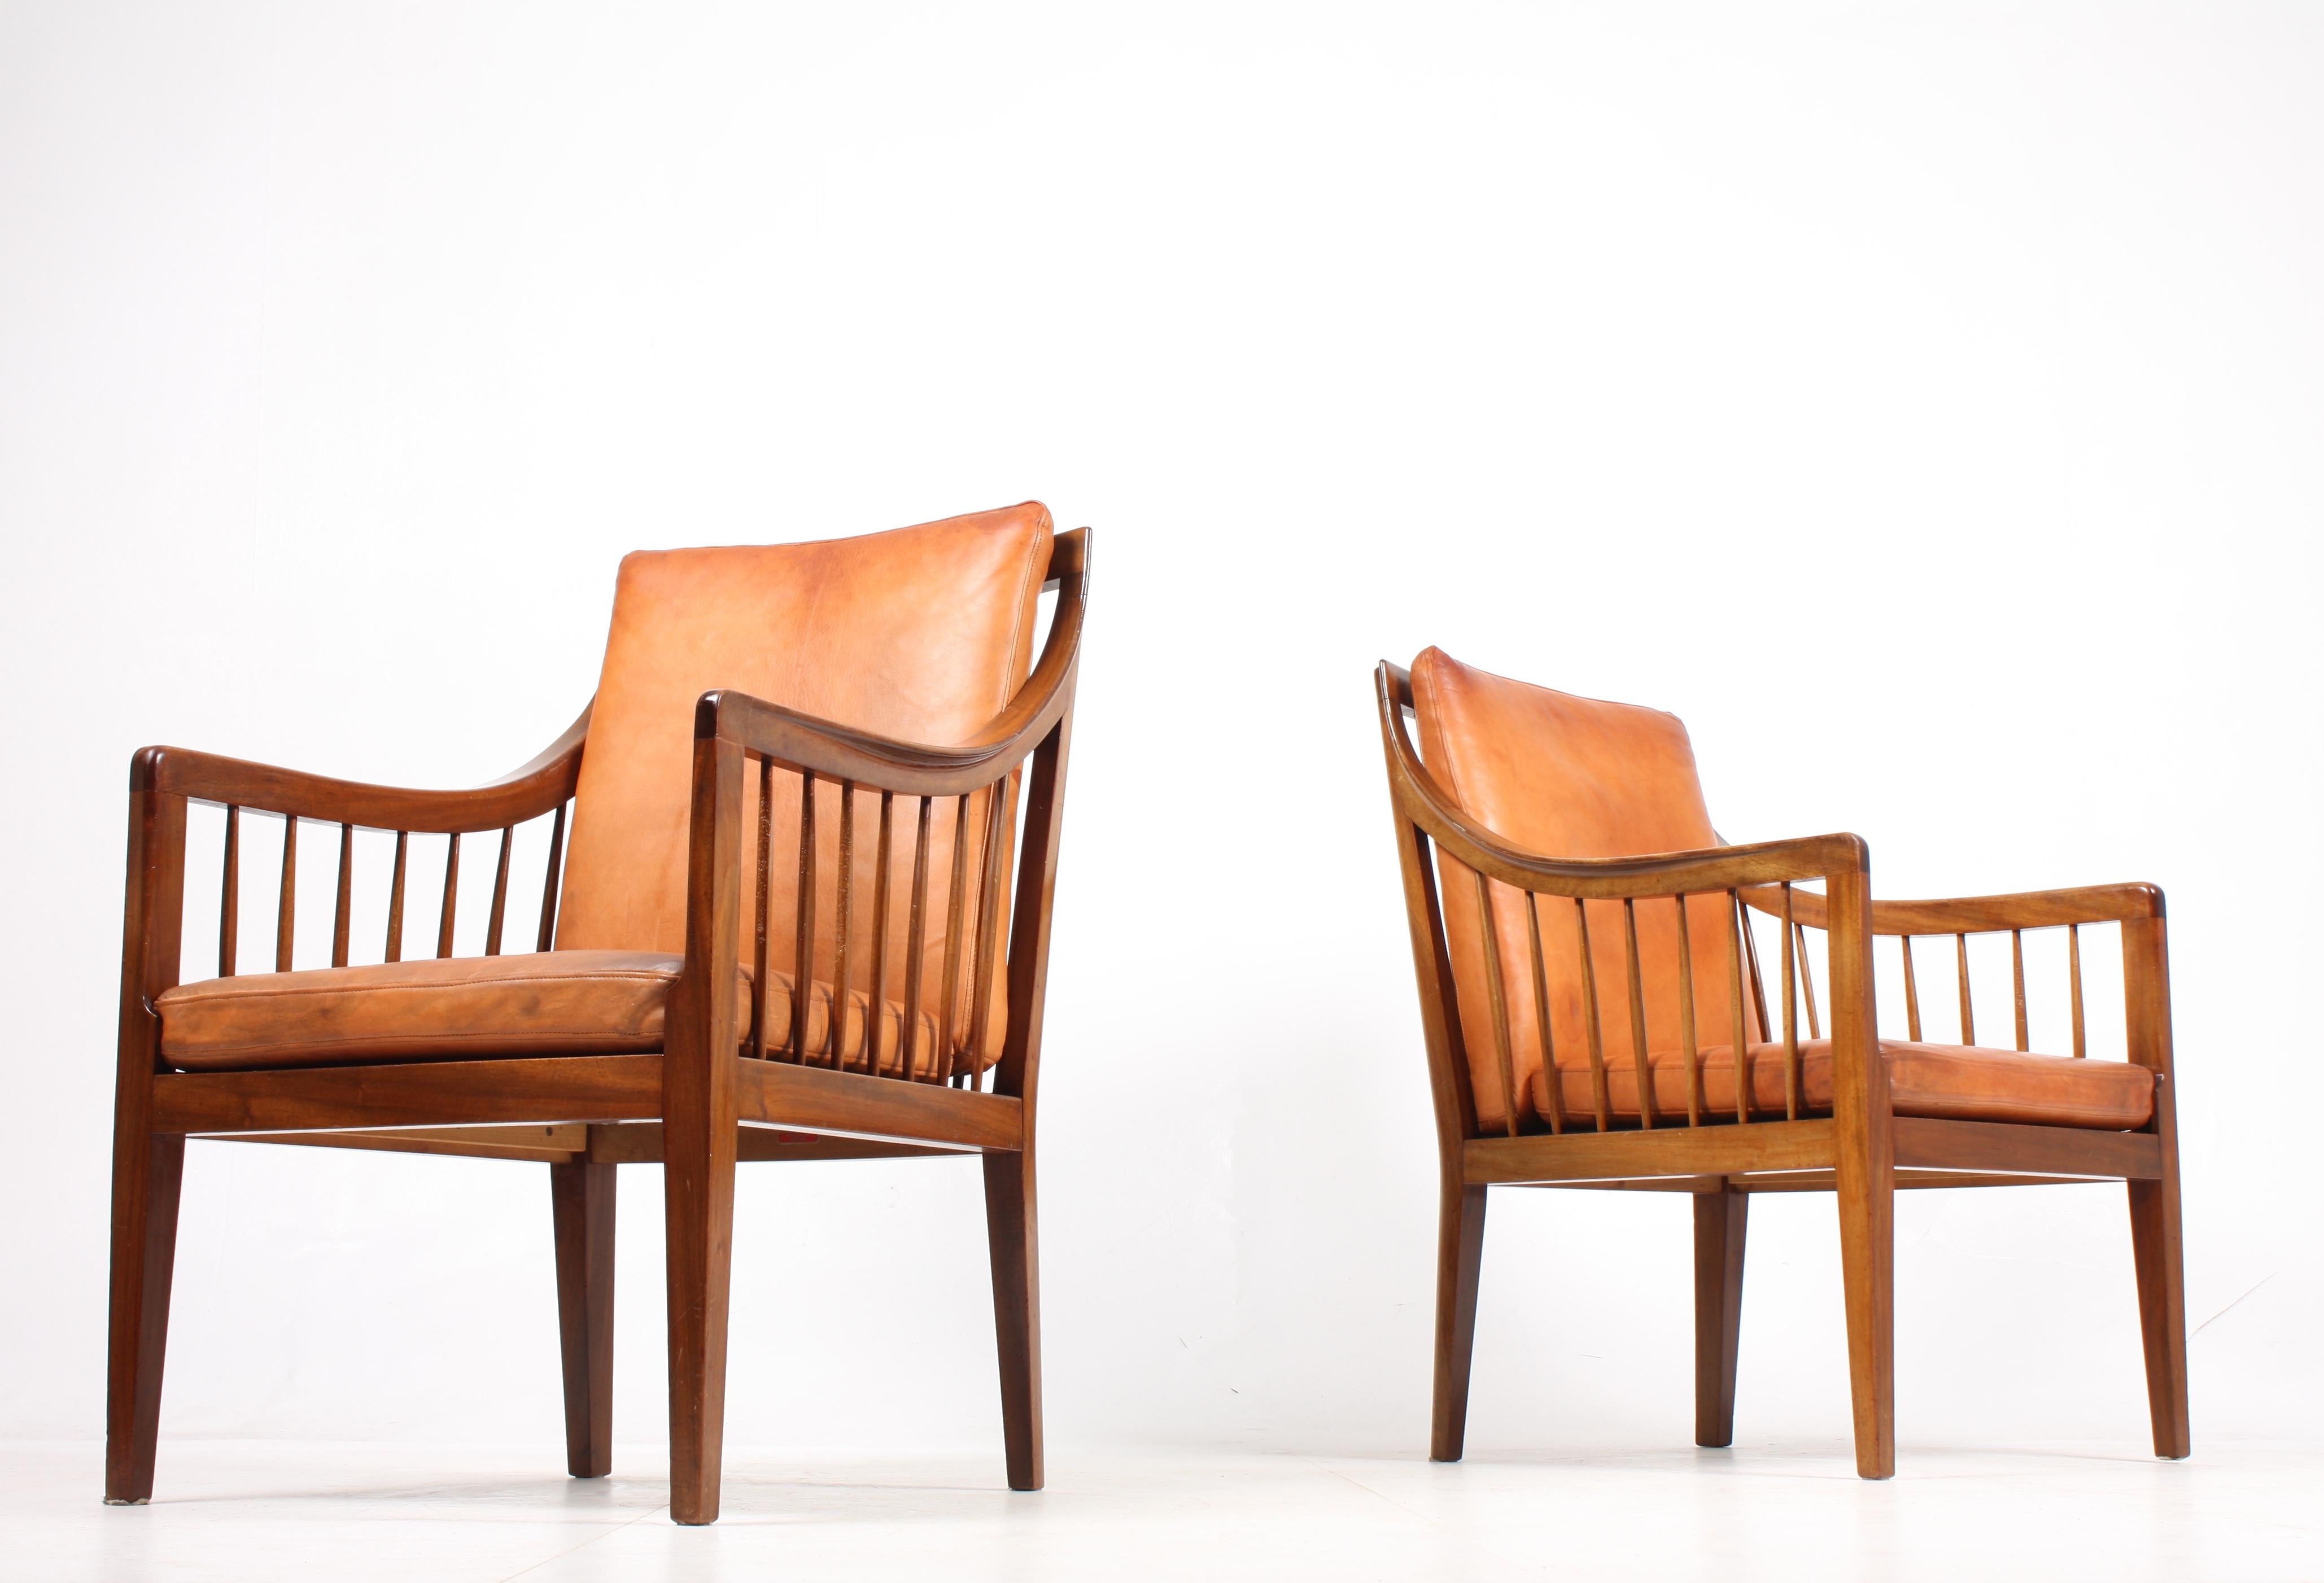 Pair of classic lounge chairs in solid mahogany with seat and back in patinated leather. Designed by Maa. Peter Hvidt for Willy Beck cabinetmakers in 1944. Great condition.